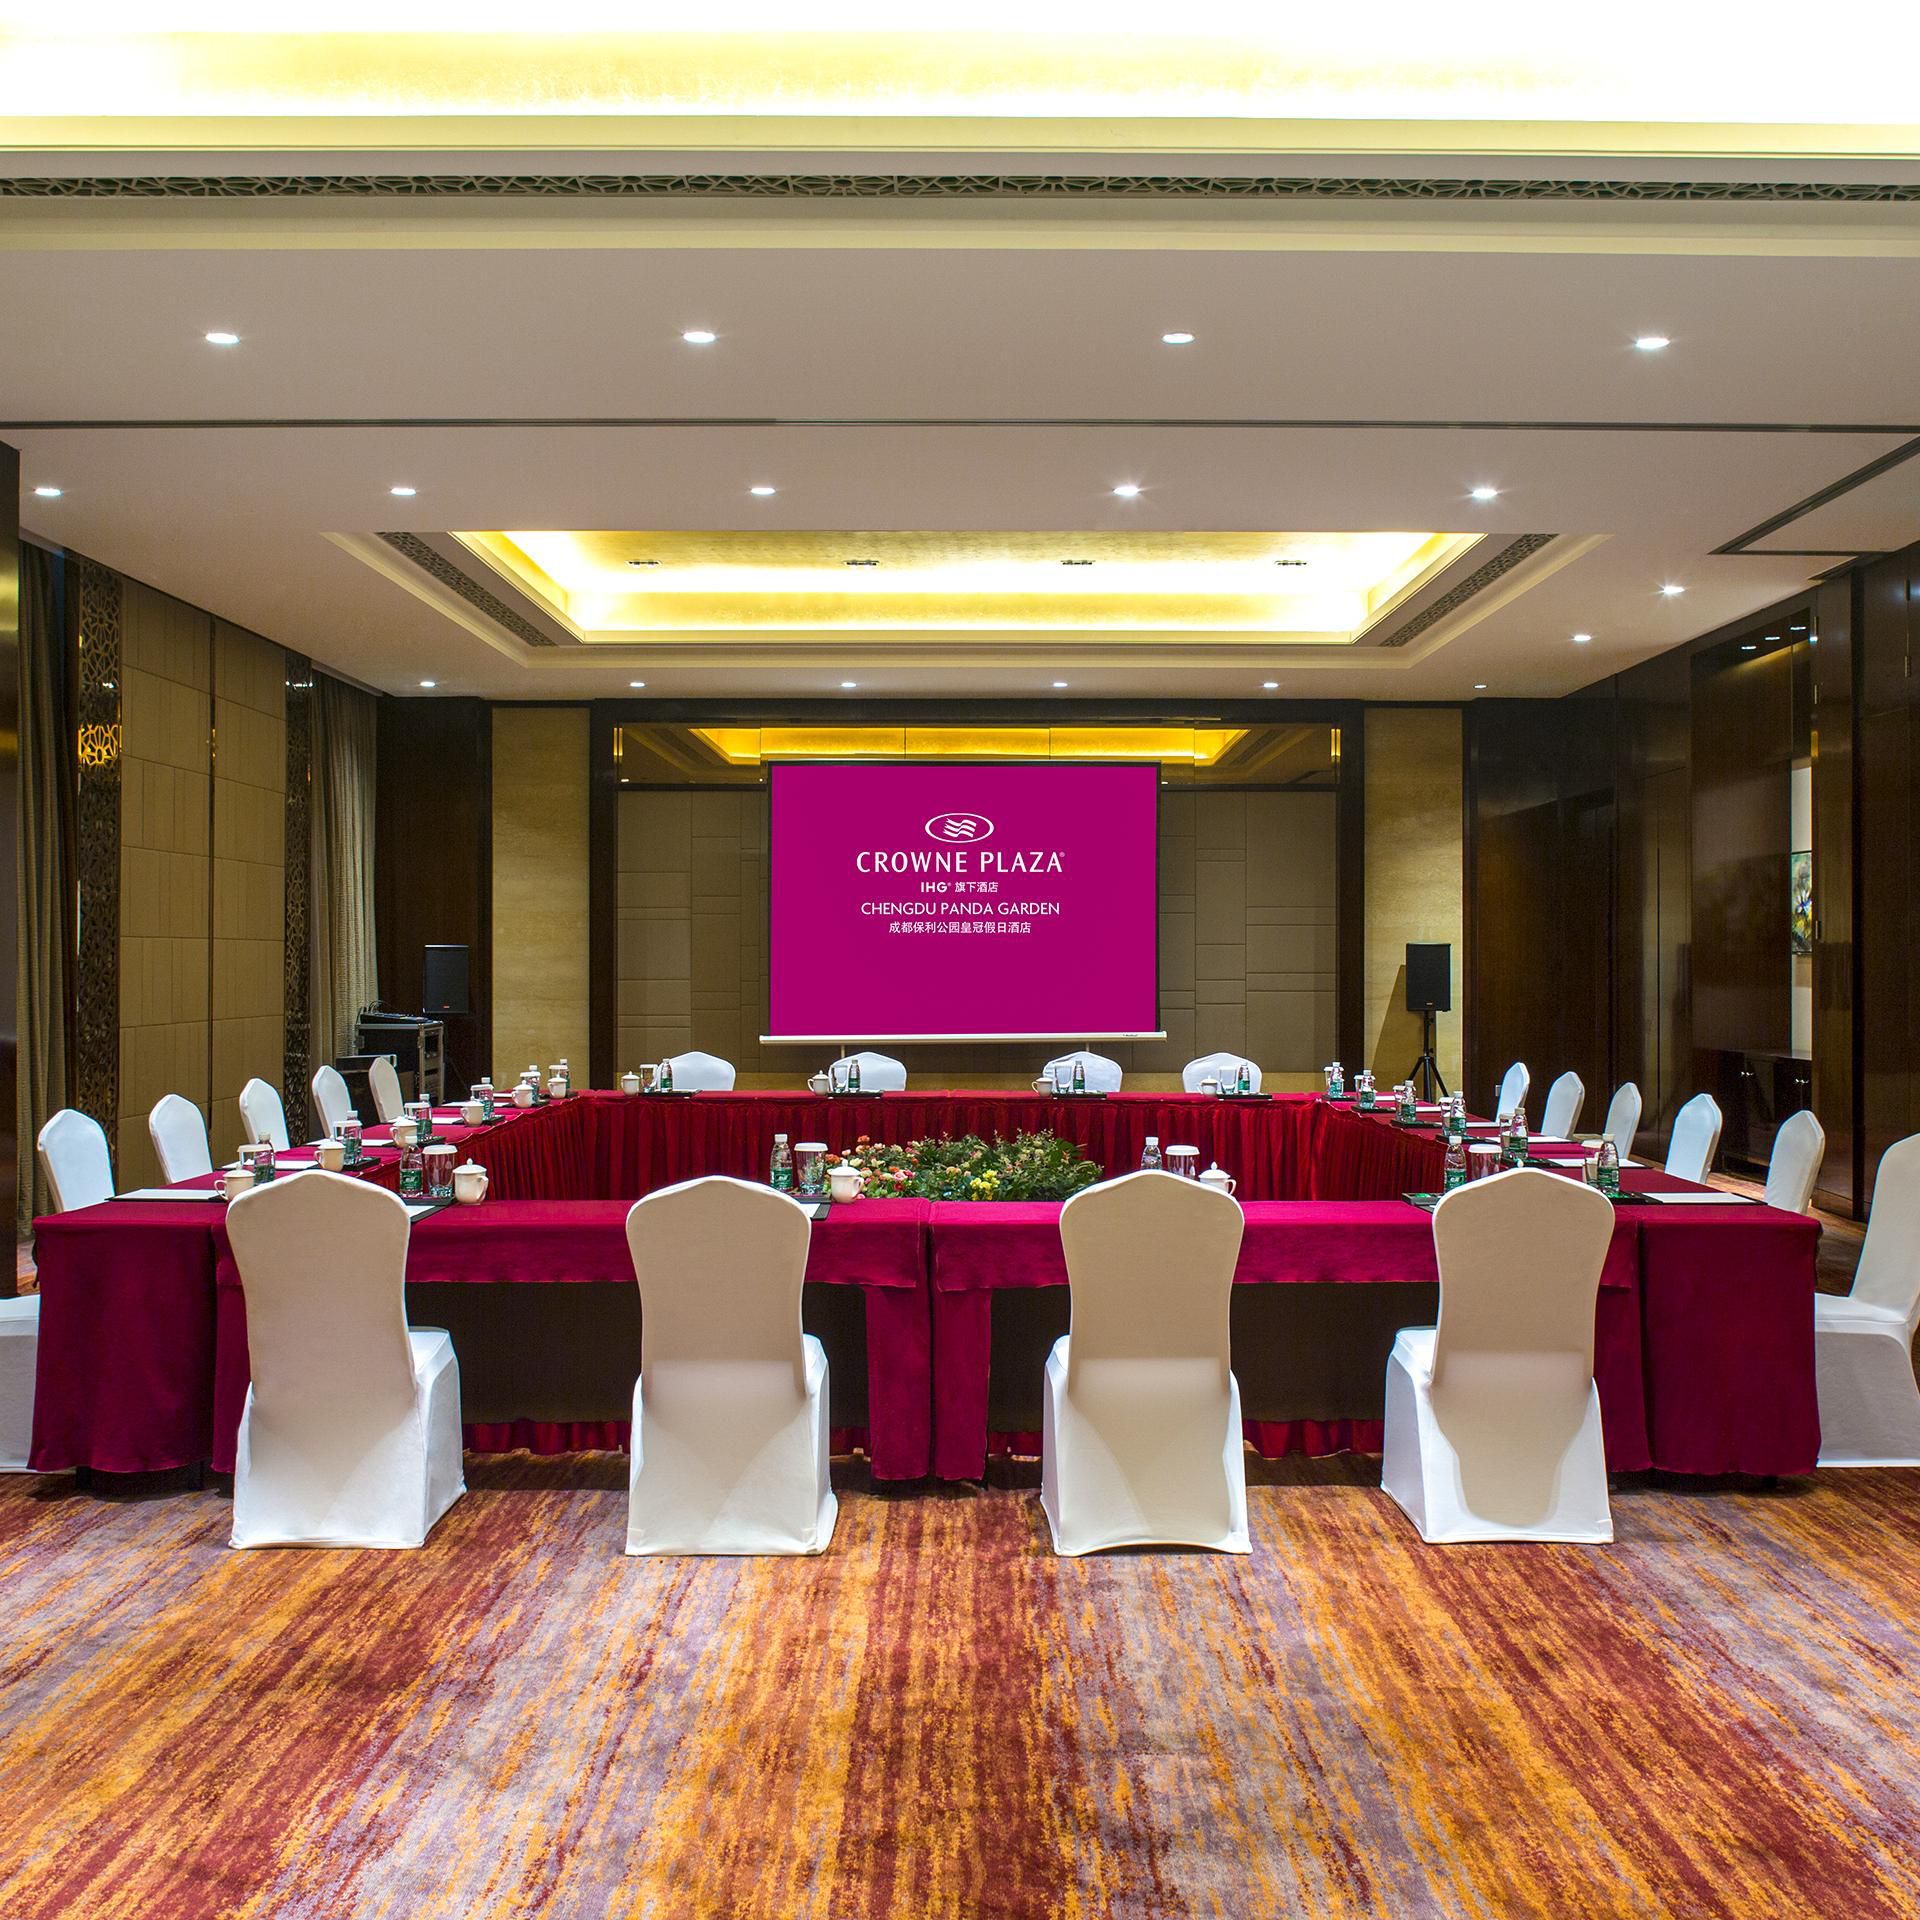 Function rooms for meetings and conference